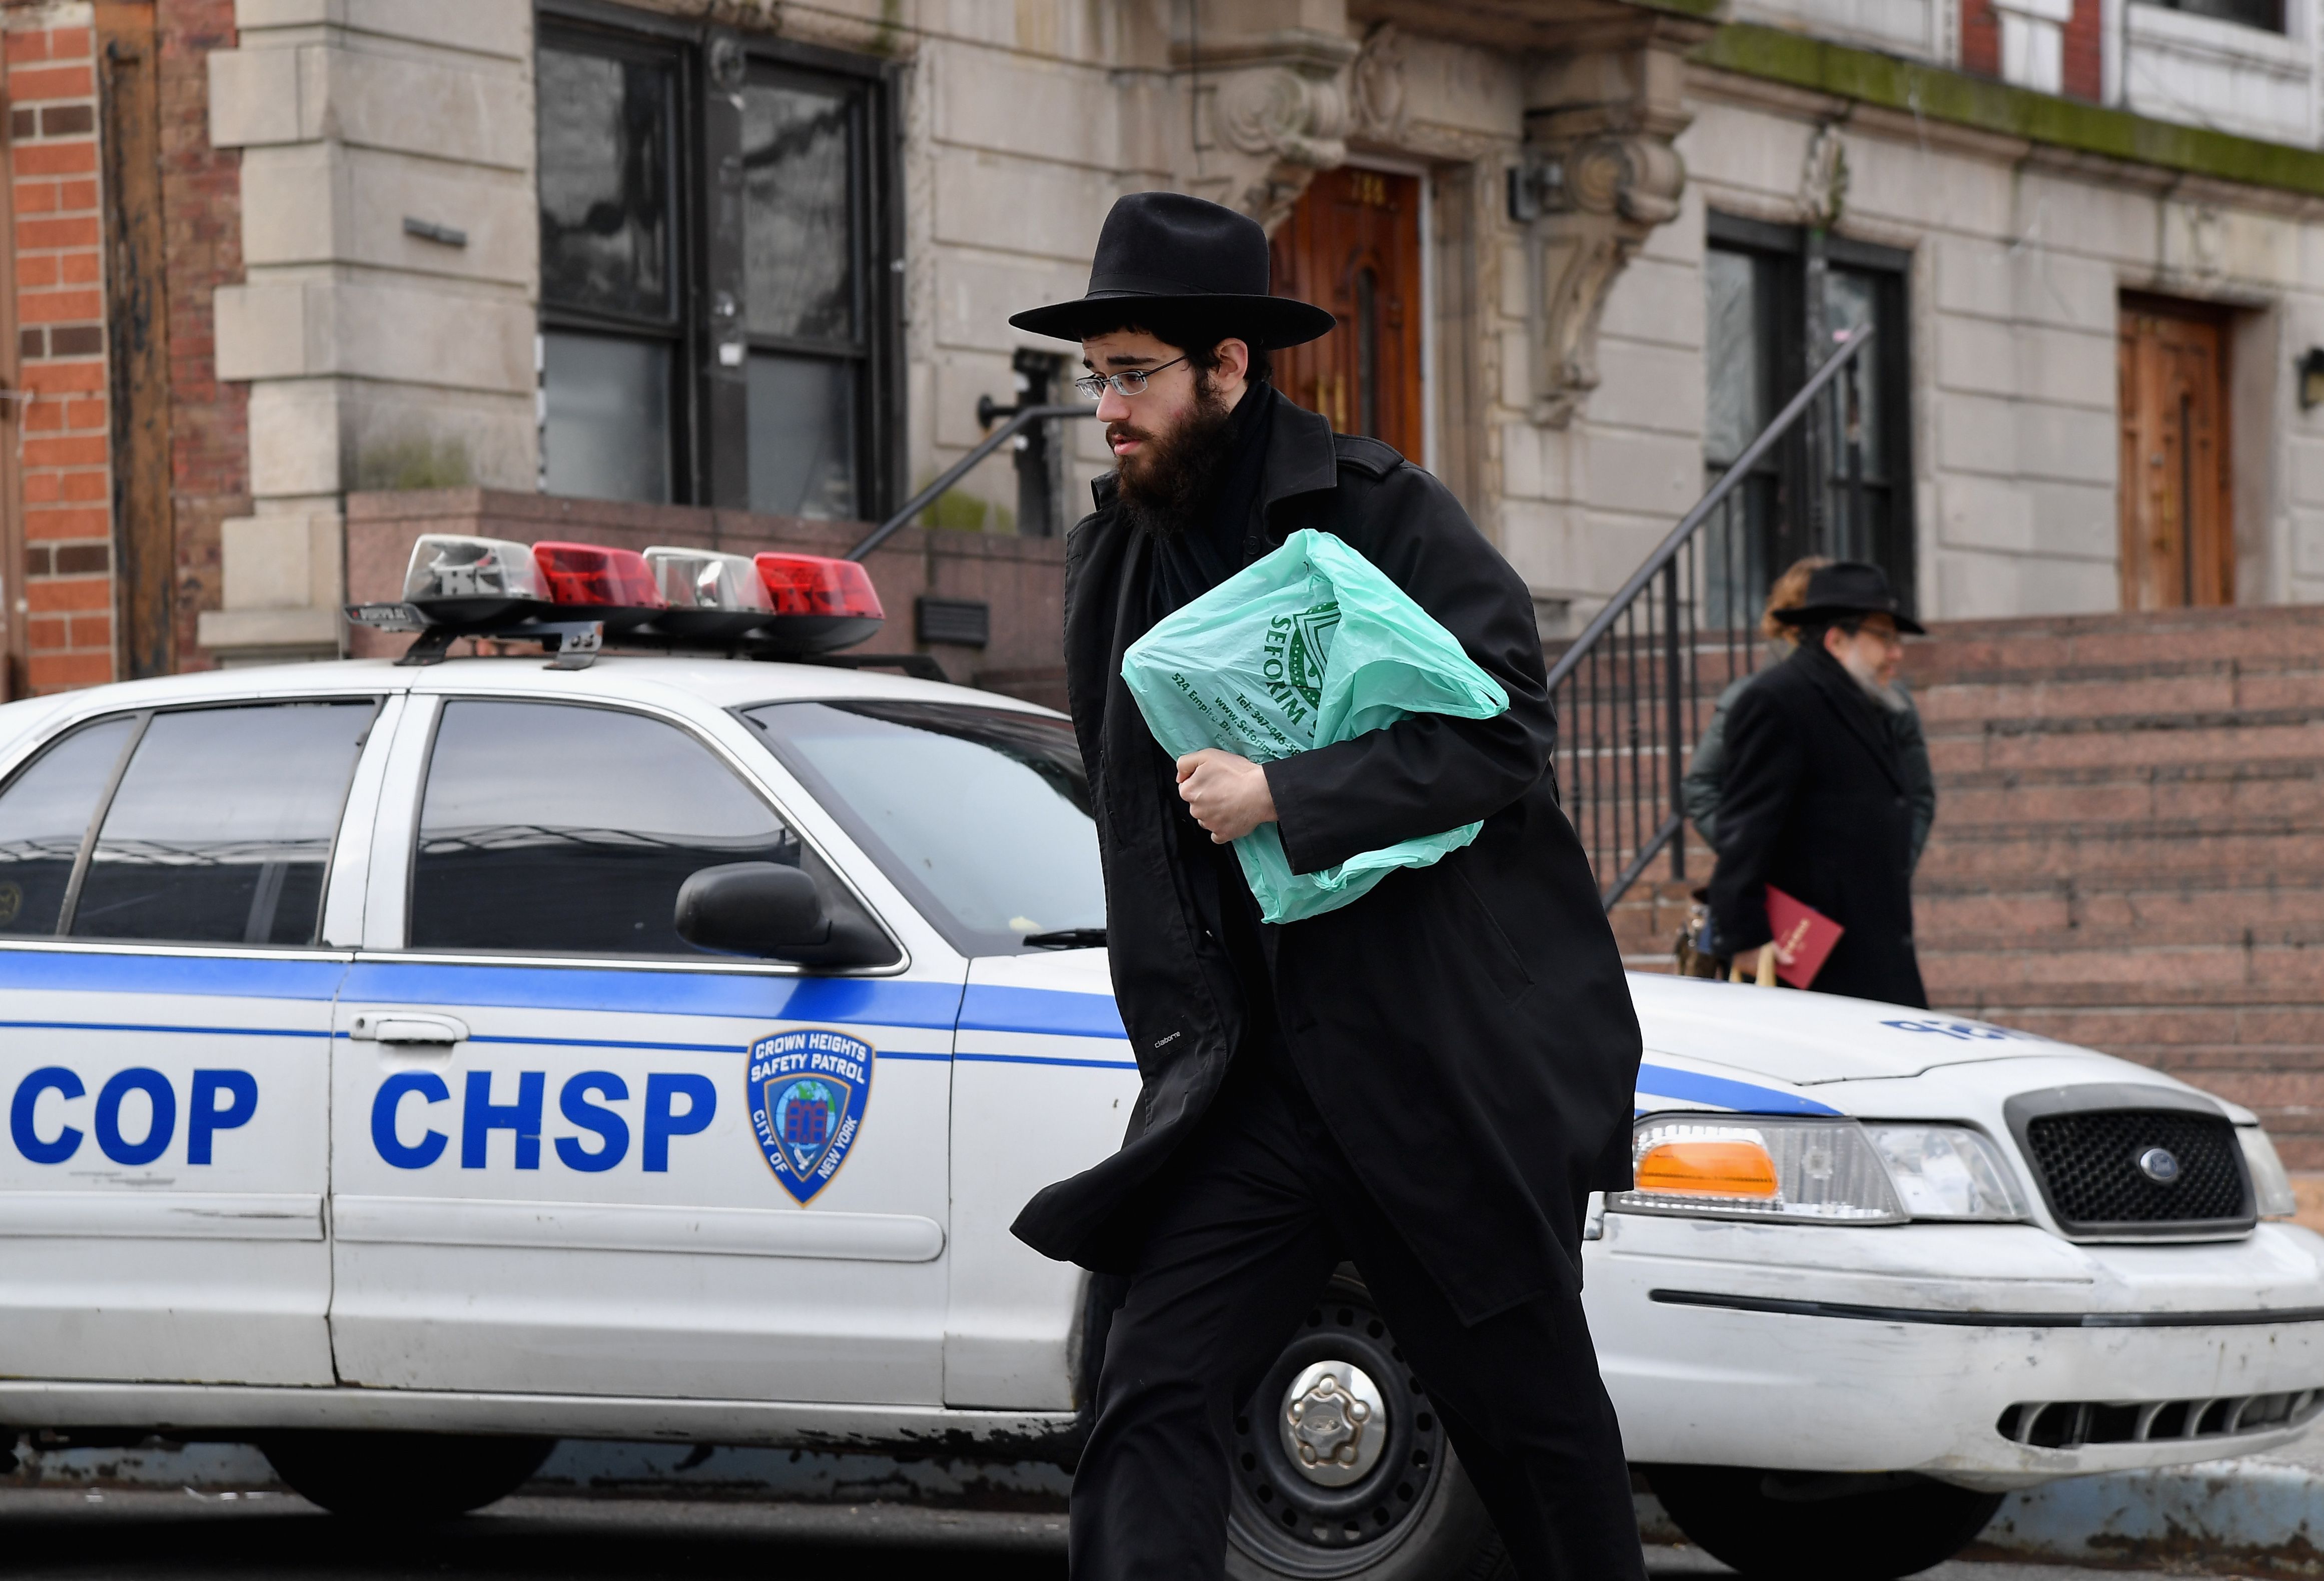 Orthodox Jewish men walks in the Brooklyn neighborhood of Crown Heights on February 27, 2019 in New York. - Residents of Crown Heights, a diverse New York neighborhood far from Manhattan's skyscrapers, are trying to understand a spate of anti-Semitic attacks that has brought back painful memories. In recent months, several people wearing the type of black clothing and hats associated with the Orthodox Jewish community have been viciously assaulted -- sometimes in broad daylight. So far this year, complaints of anti-Semitic crimes have soared by 71 percent in New York, compounding a 23 percent increase in 2018 (Photo: ANGELA WEISS/AFP via Getty Images)